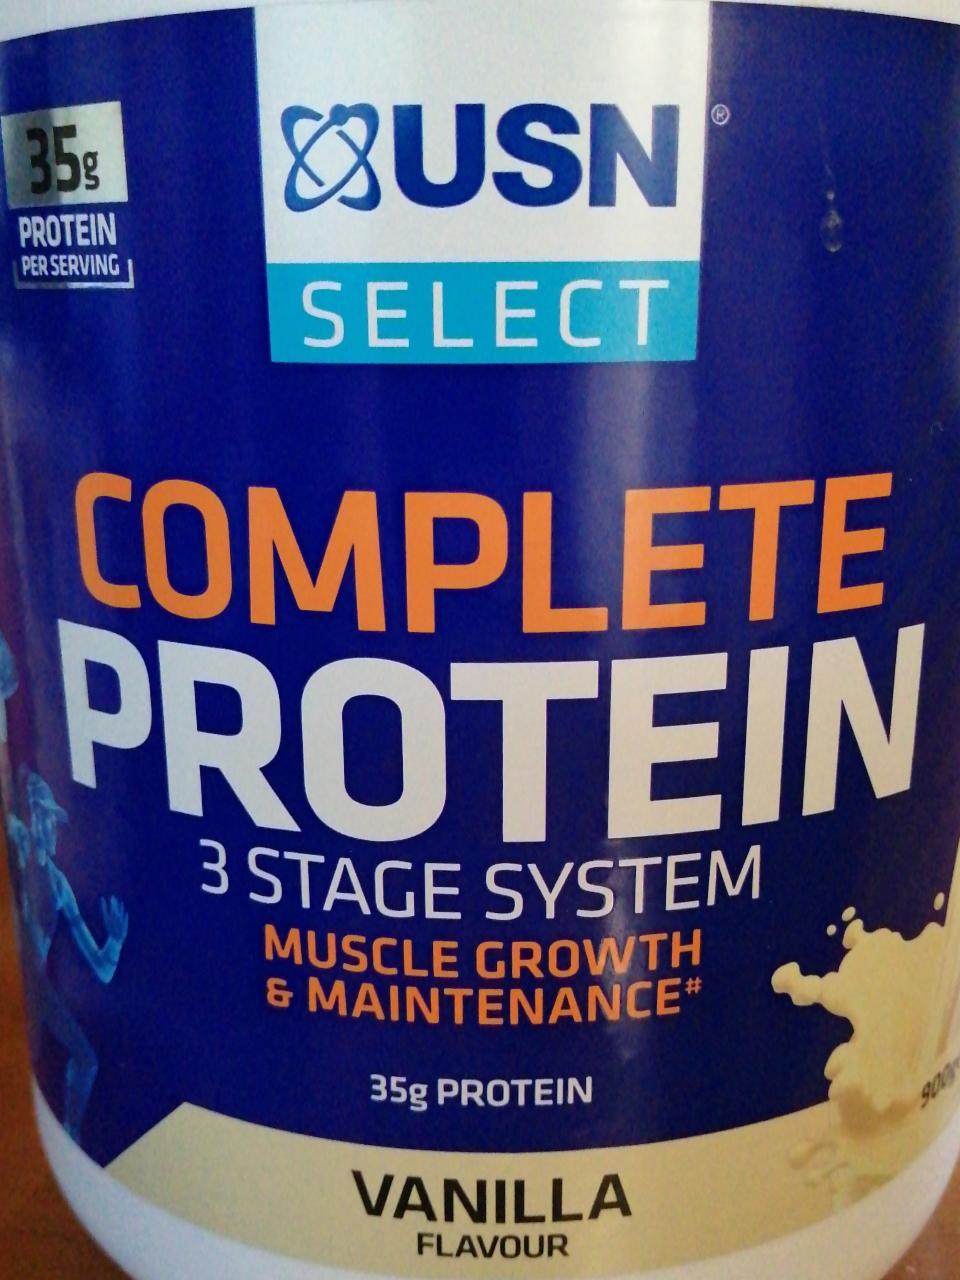 Fotografie - Complete Protein 3 Stage System Muscle Growth & Maintenance Vanilla flavour USN Select